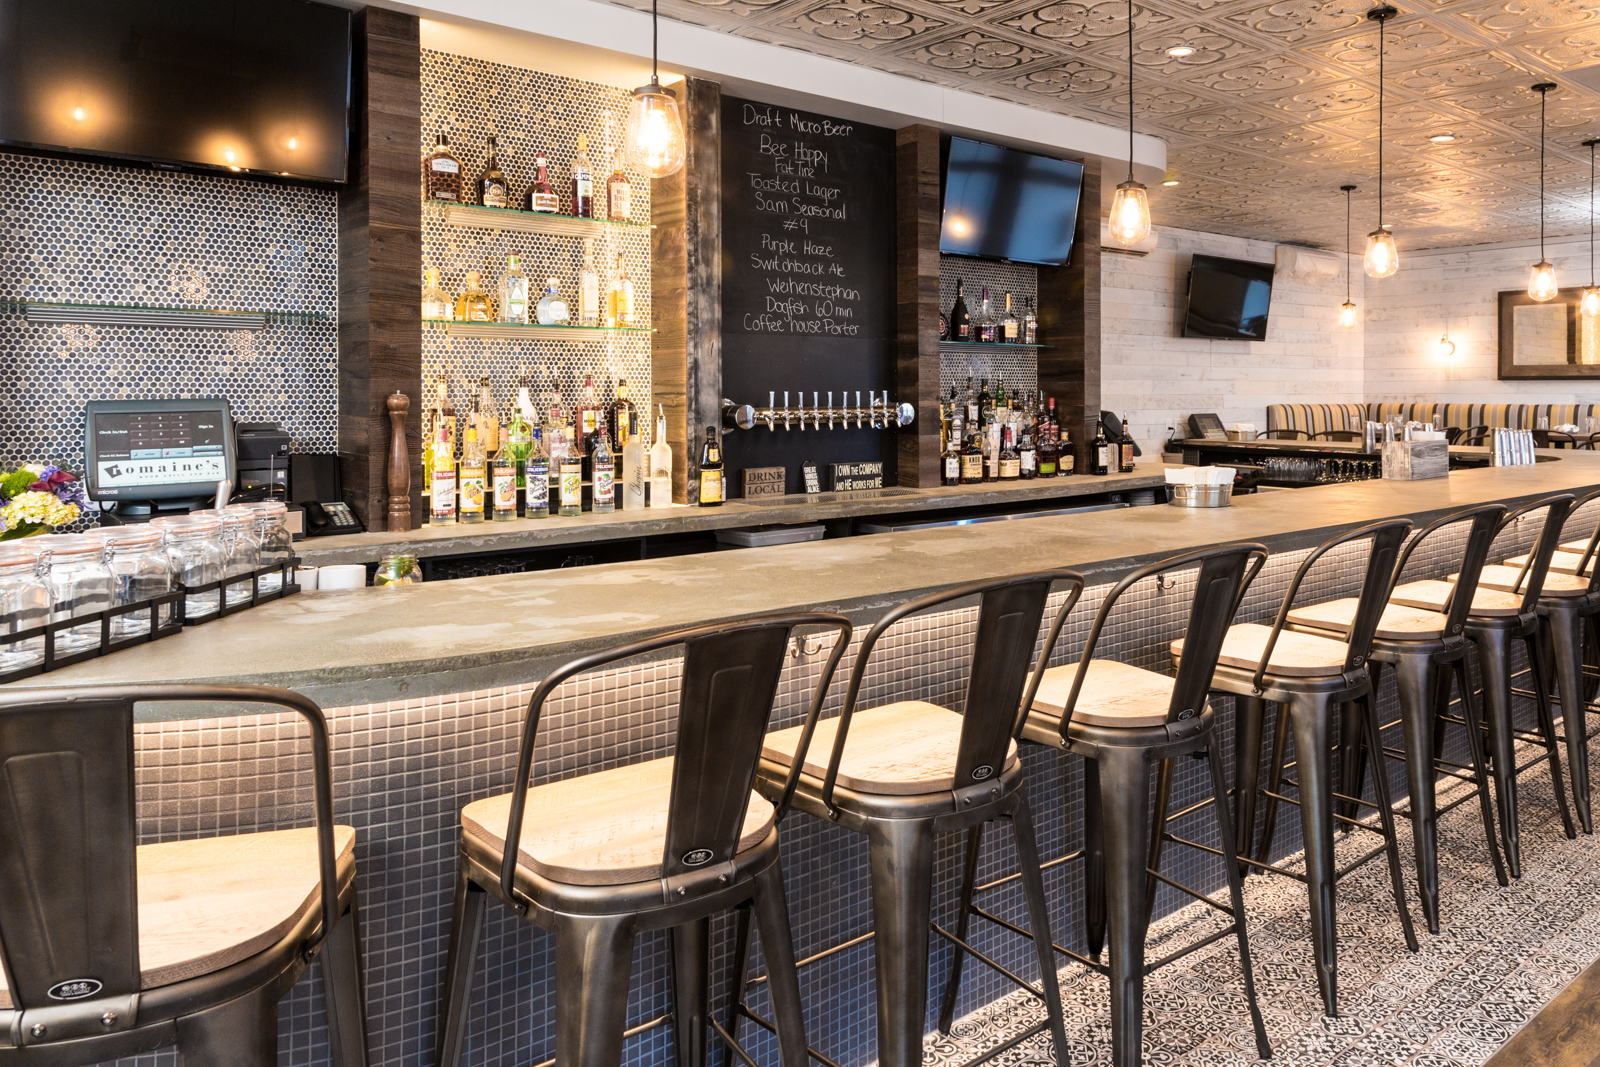 Modern Bar and Restaurant Interior Design with bar and seating